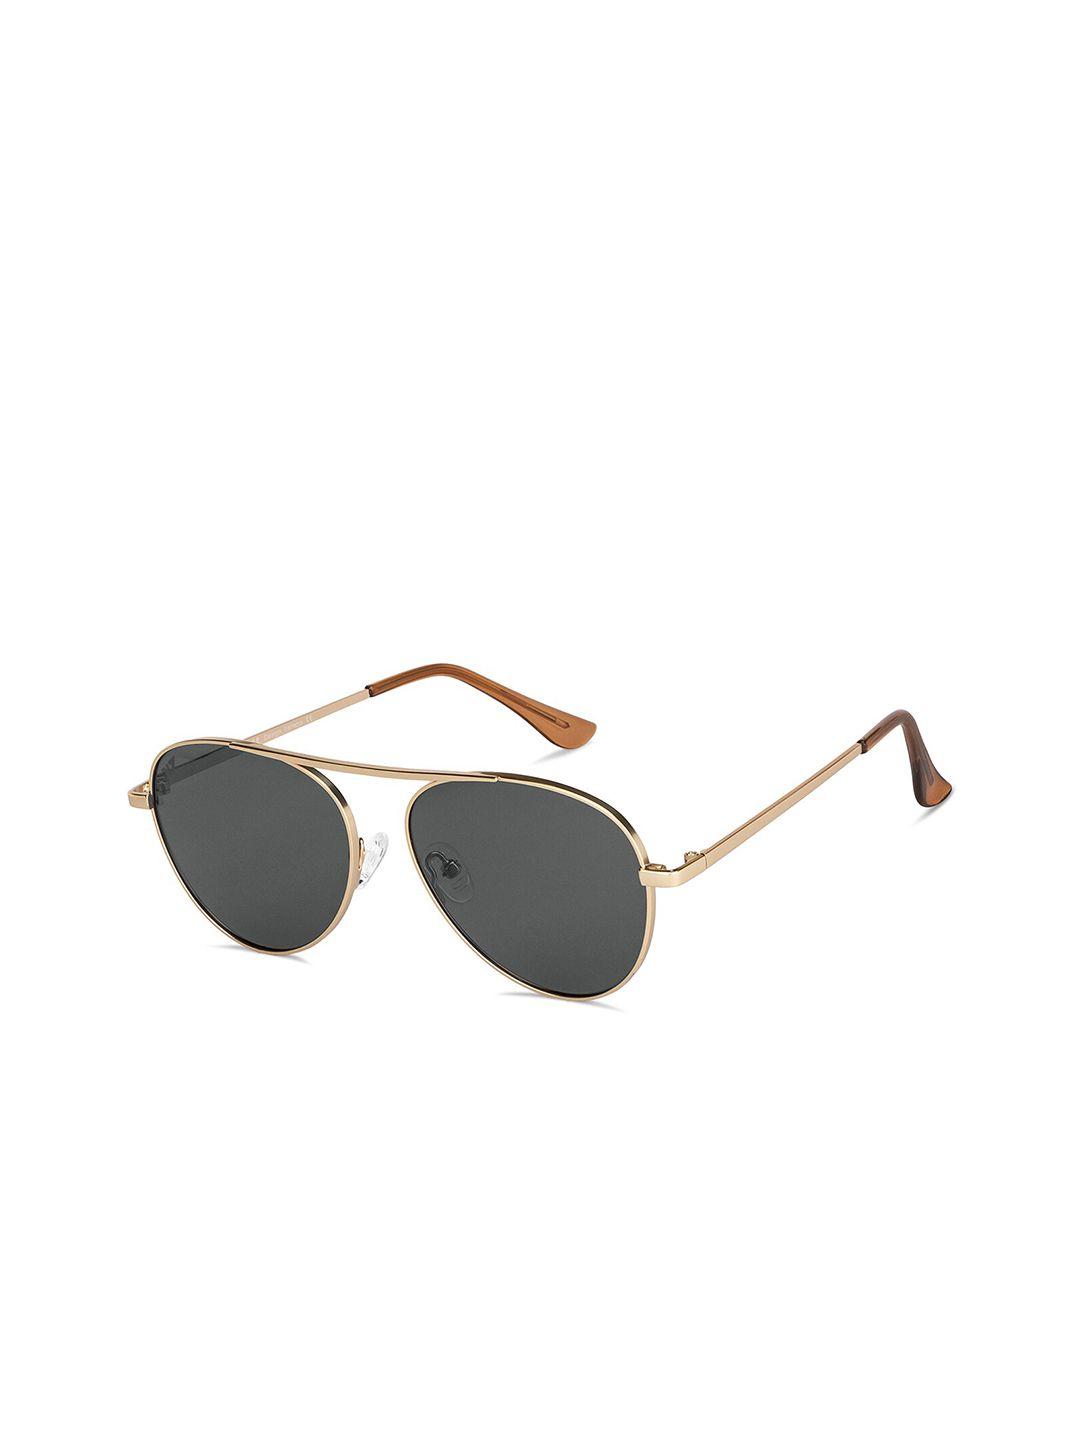 vincent chase unisex grey lens & gold-toned aviator sunglasses